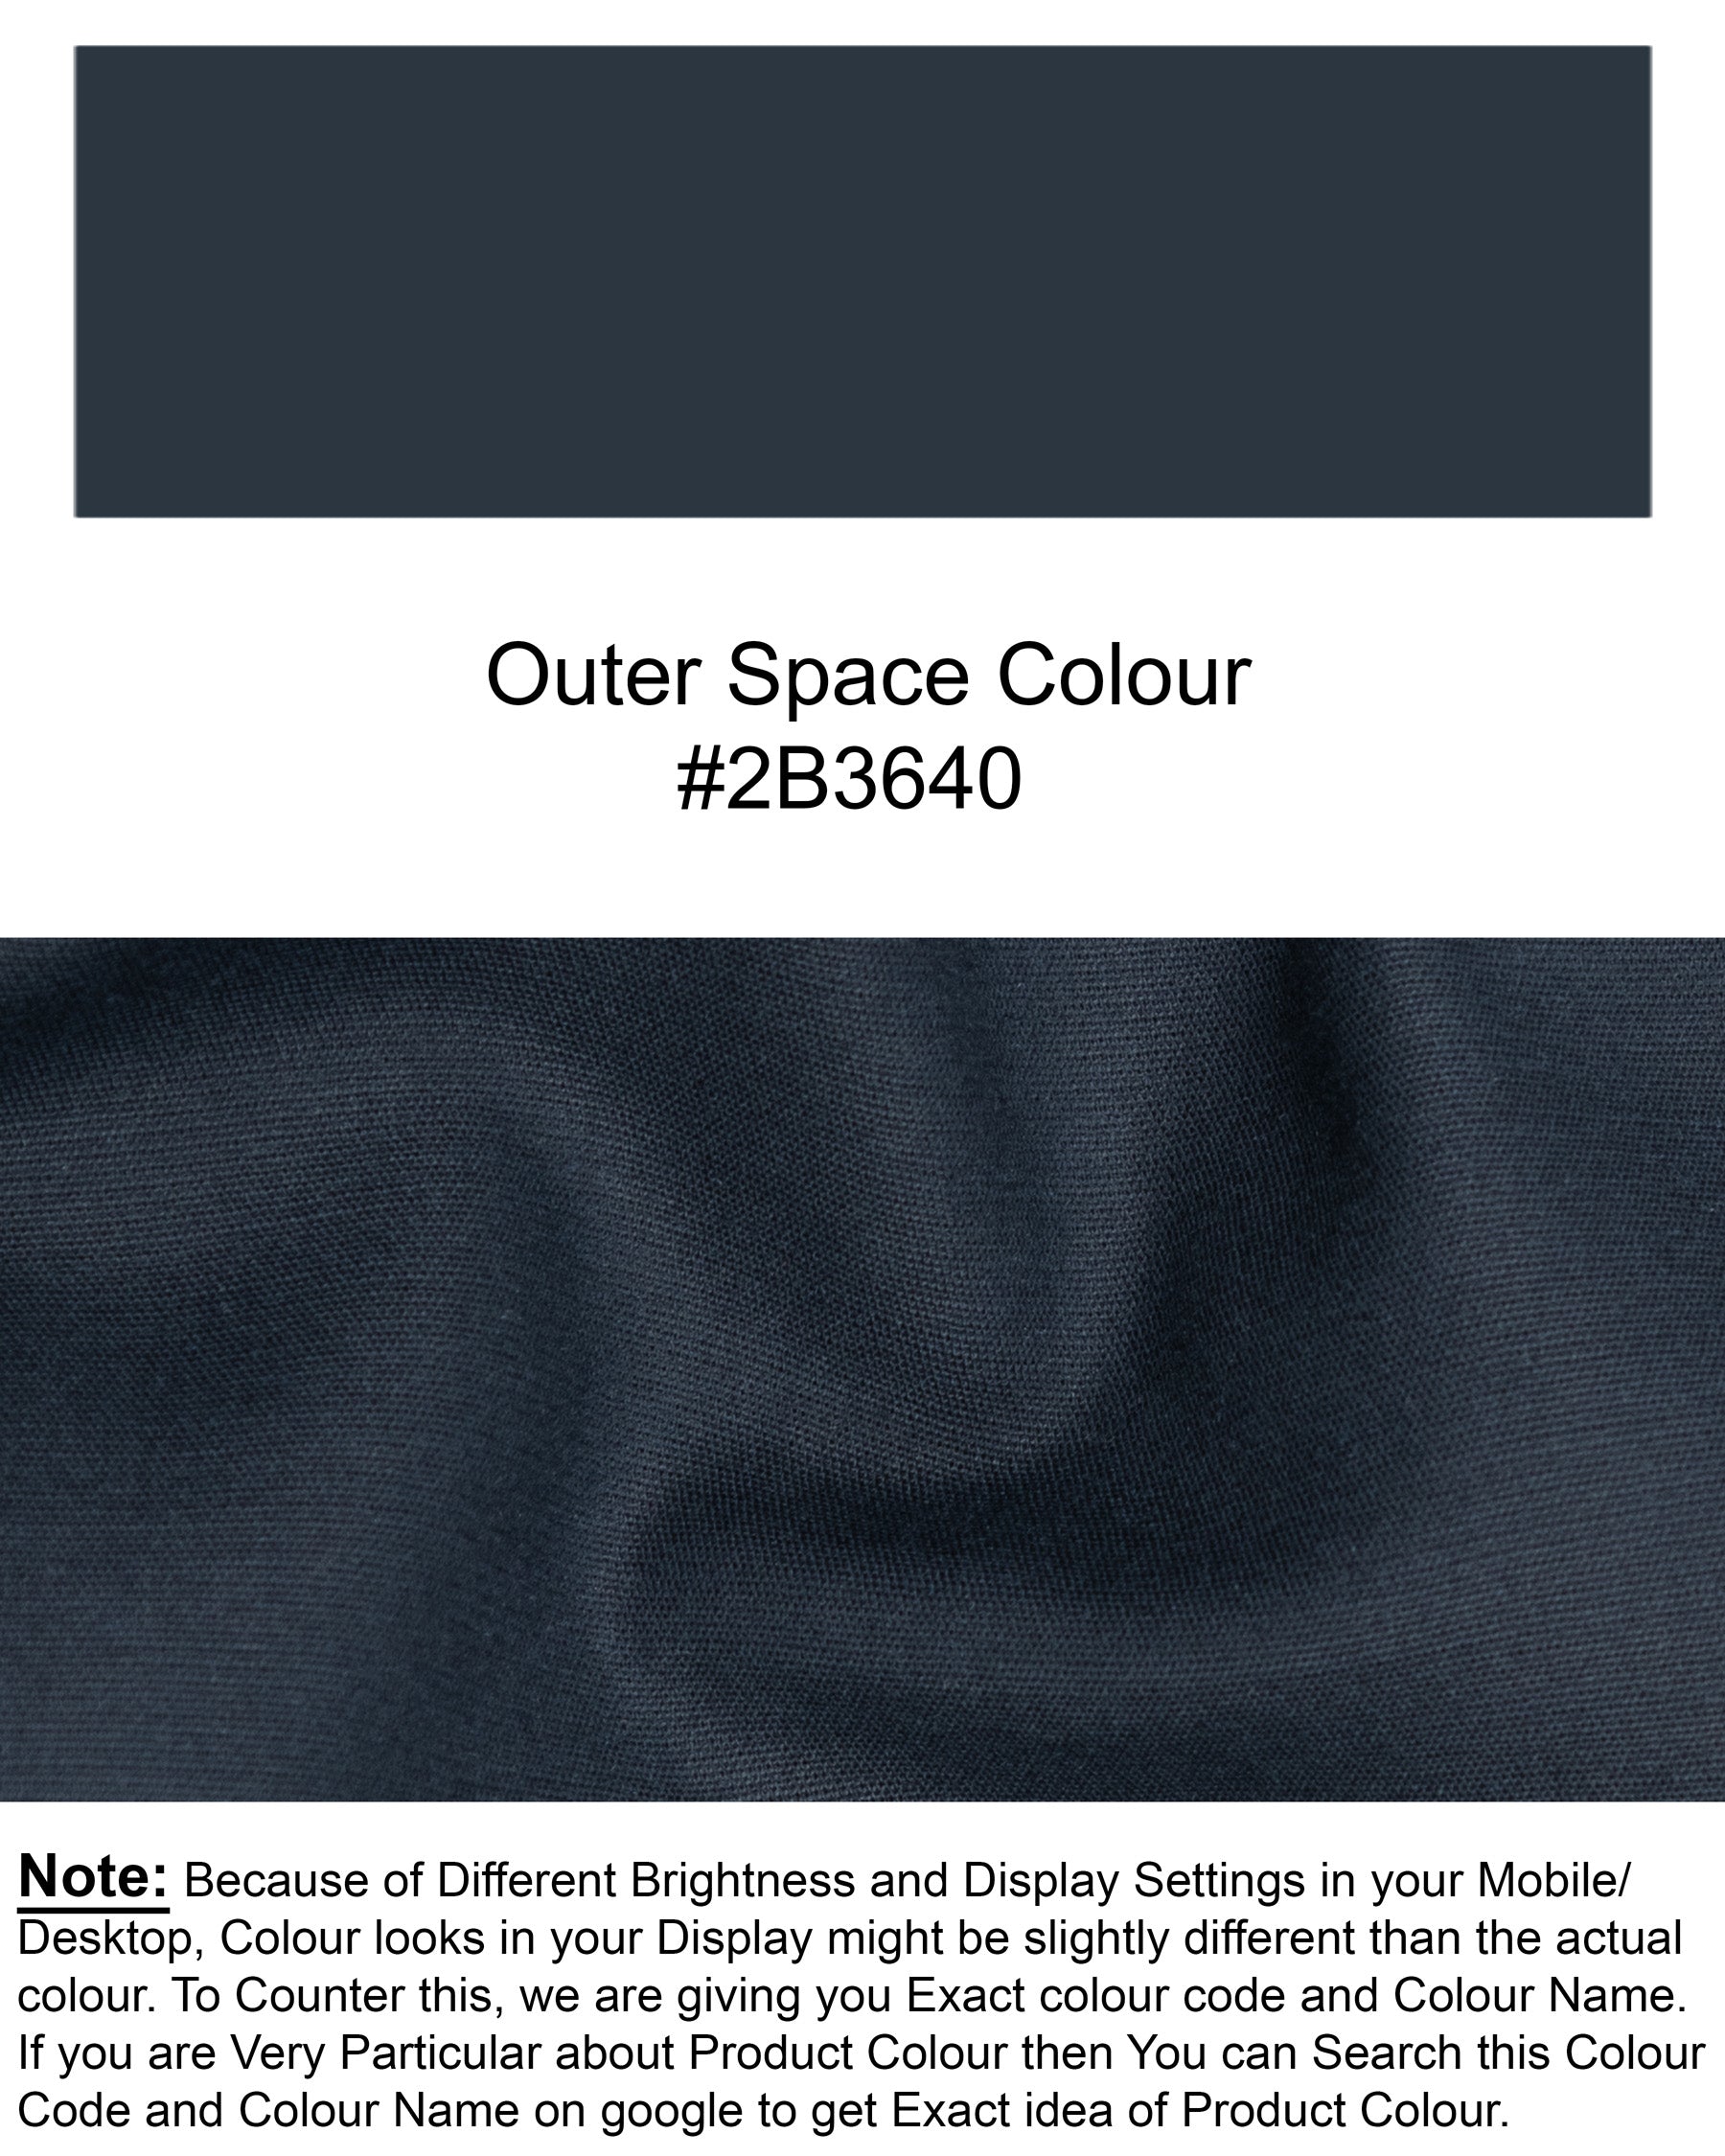 Outer Space Blue Double-Breasted Premium Cotton Blazer BL1294-DB-36, BL1294-DB-38, BL1294-DB-40, BL1294-DB-42, BL1294-DB-44, BL1294-DB-46, BL1294-DB-48, BL1294-DB-50, BL1294-DB-52, BL1294-DB-54, BL1294-DB-56, BL1294-DB-58, BL1294-DB-60